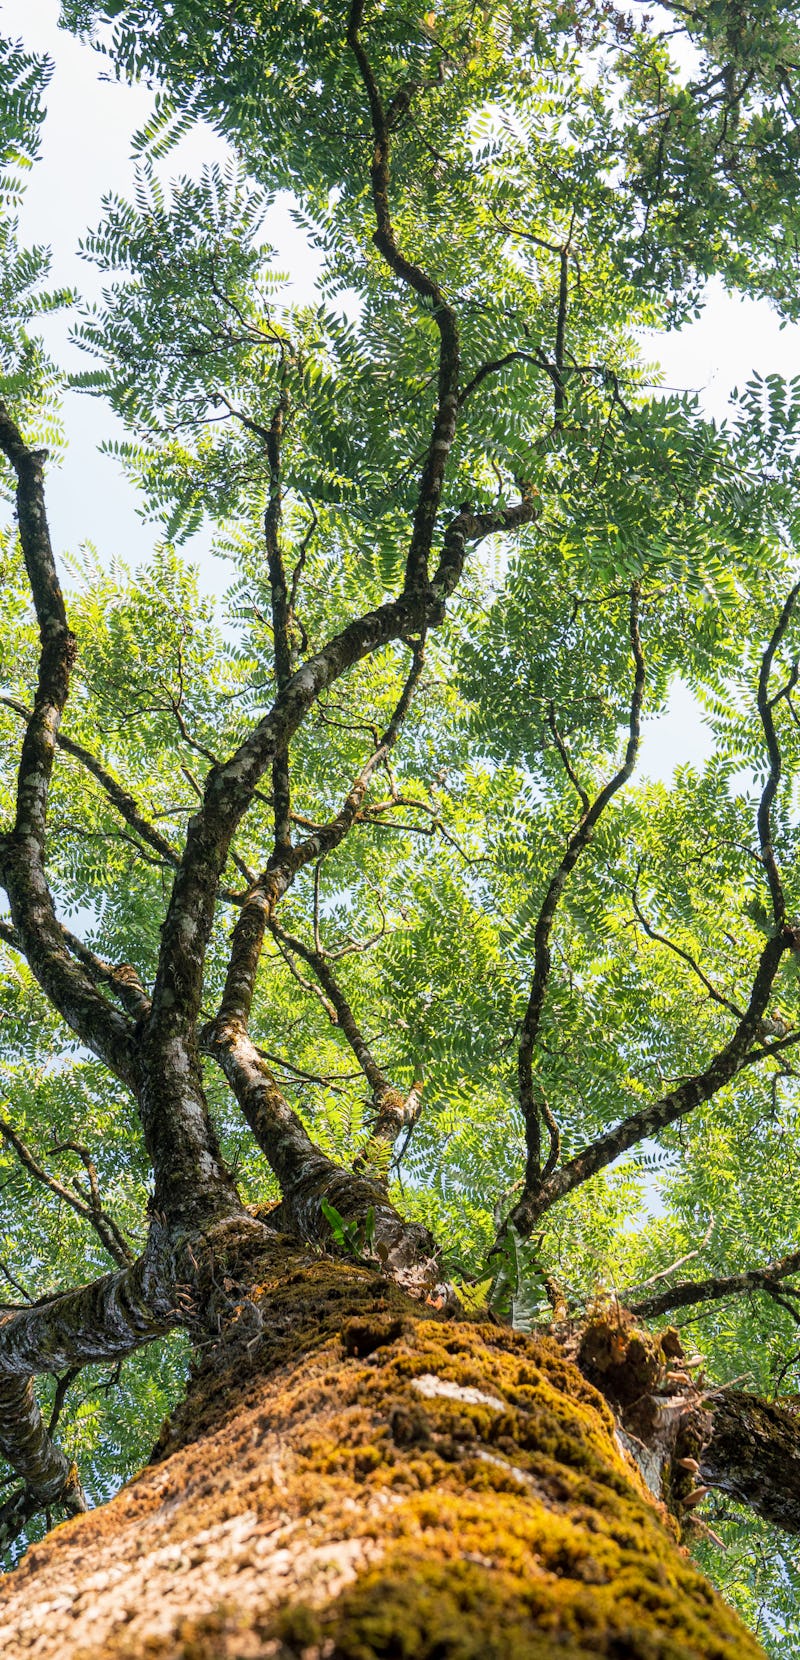 View looking up into lush green branches of large tree and tall Green Tree in Spring.